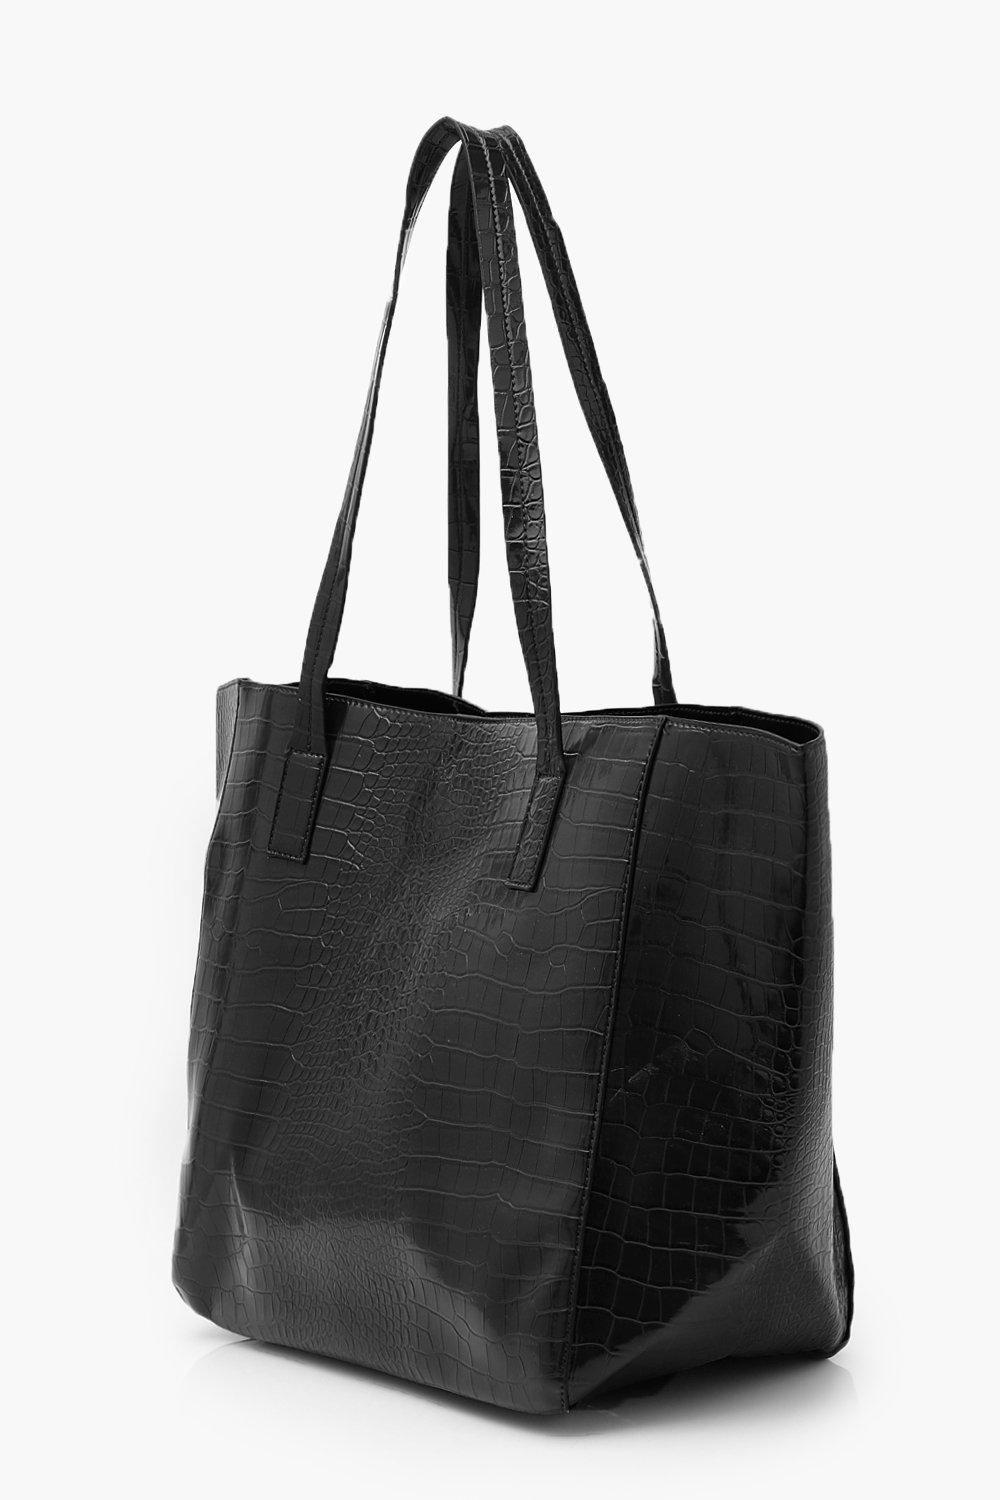 Oversized Faux Leather Croc Tote Day Bag | boohoo